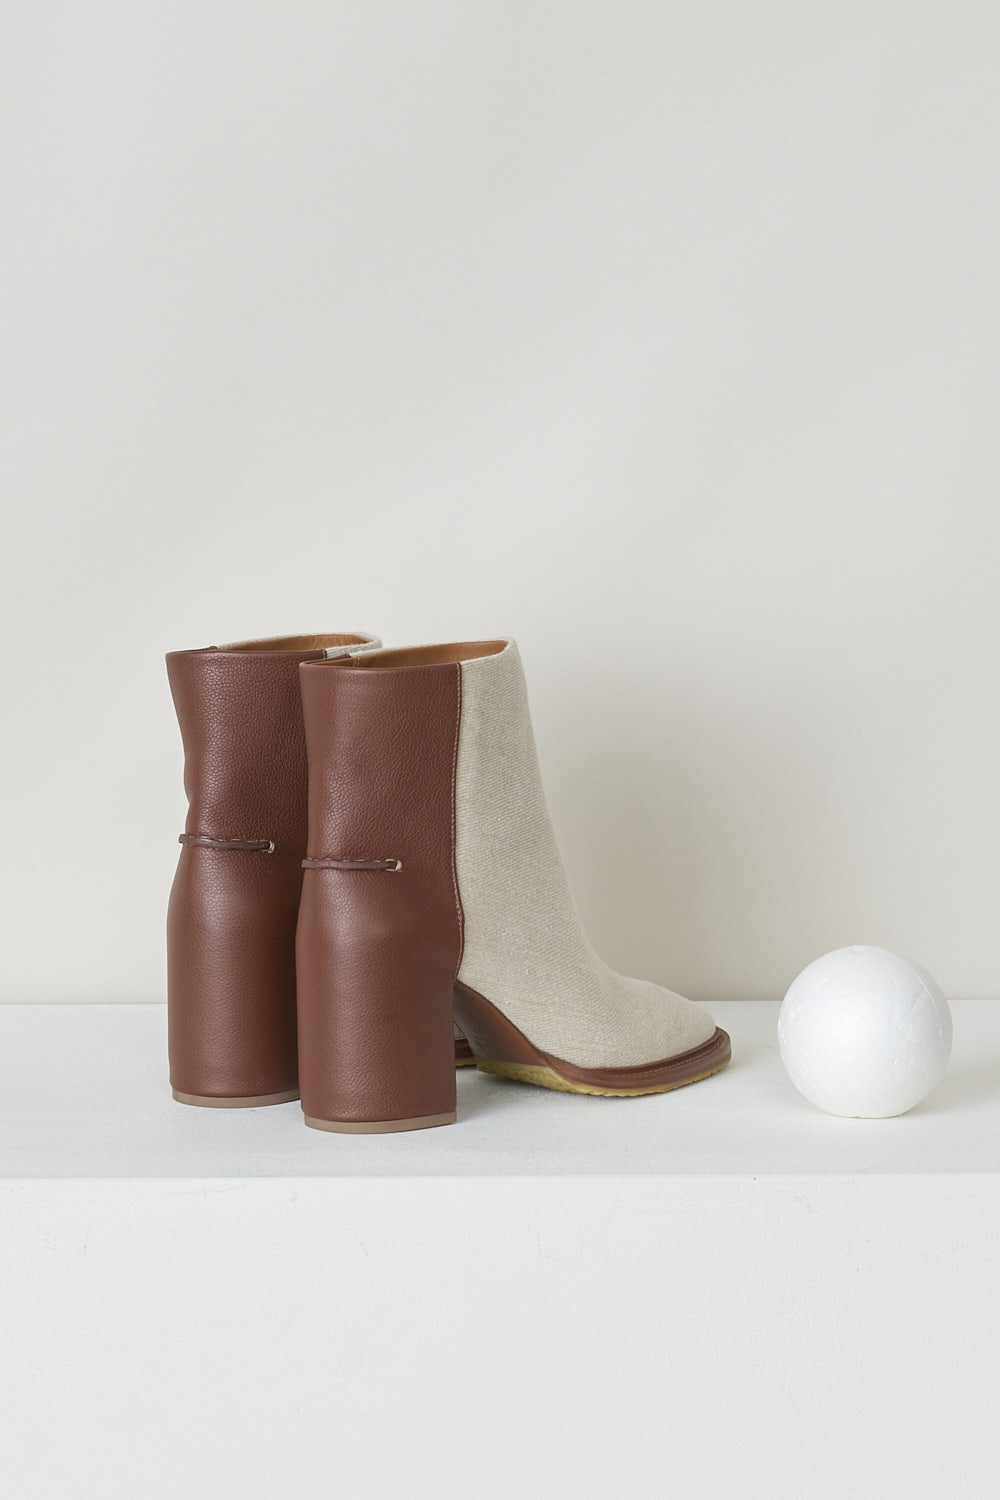 CHLOÃ‰, BEIGE EDITH ANKLE BOOT WITH BROWN HEEL, CHC22S521W89C, Beige, Brown, Back, These beige slip-on ankle boots have a brown leather-clad block heel with white stitching on the ankle. The boots have a round toe and a contrasting brown sole. 
